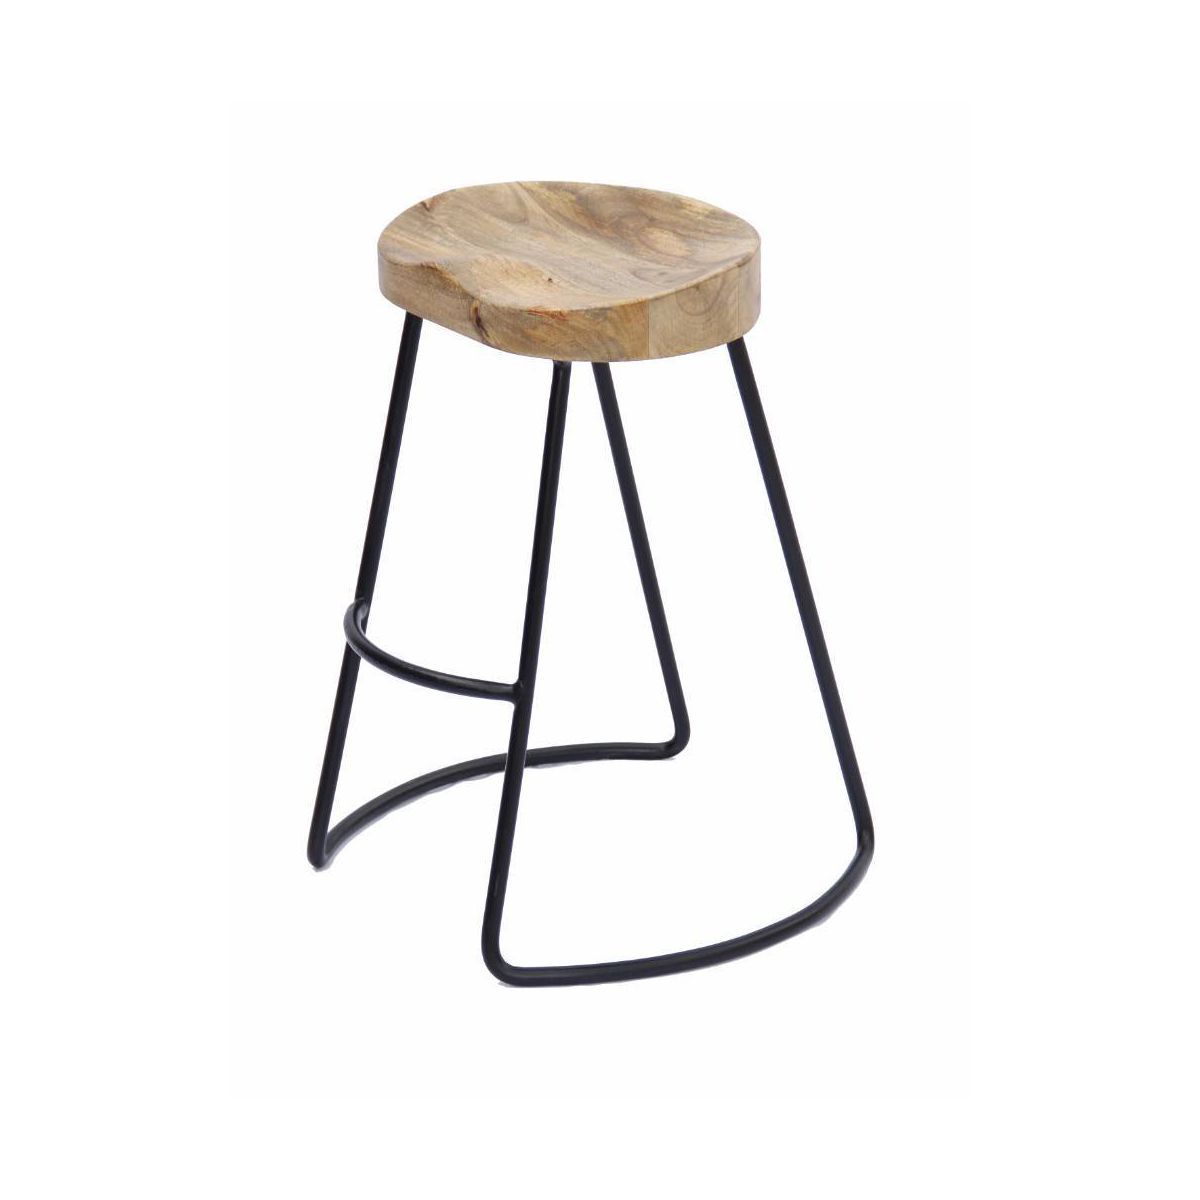 Wooden Saddle Seat Barstool Brown and Black - The Urban Port | Target